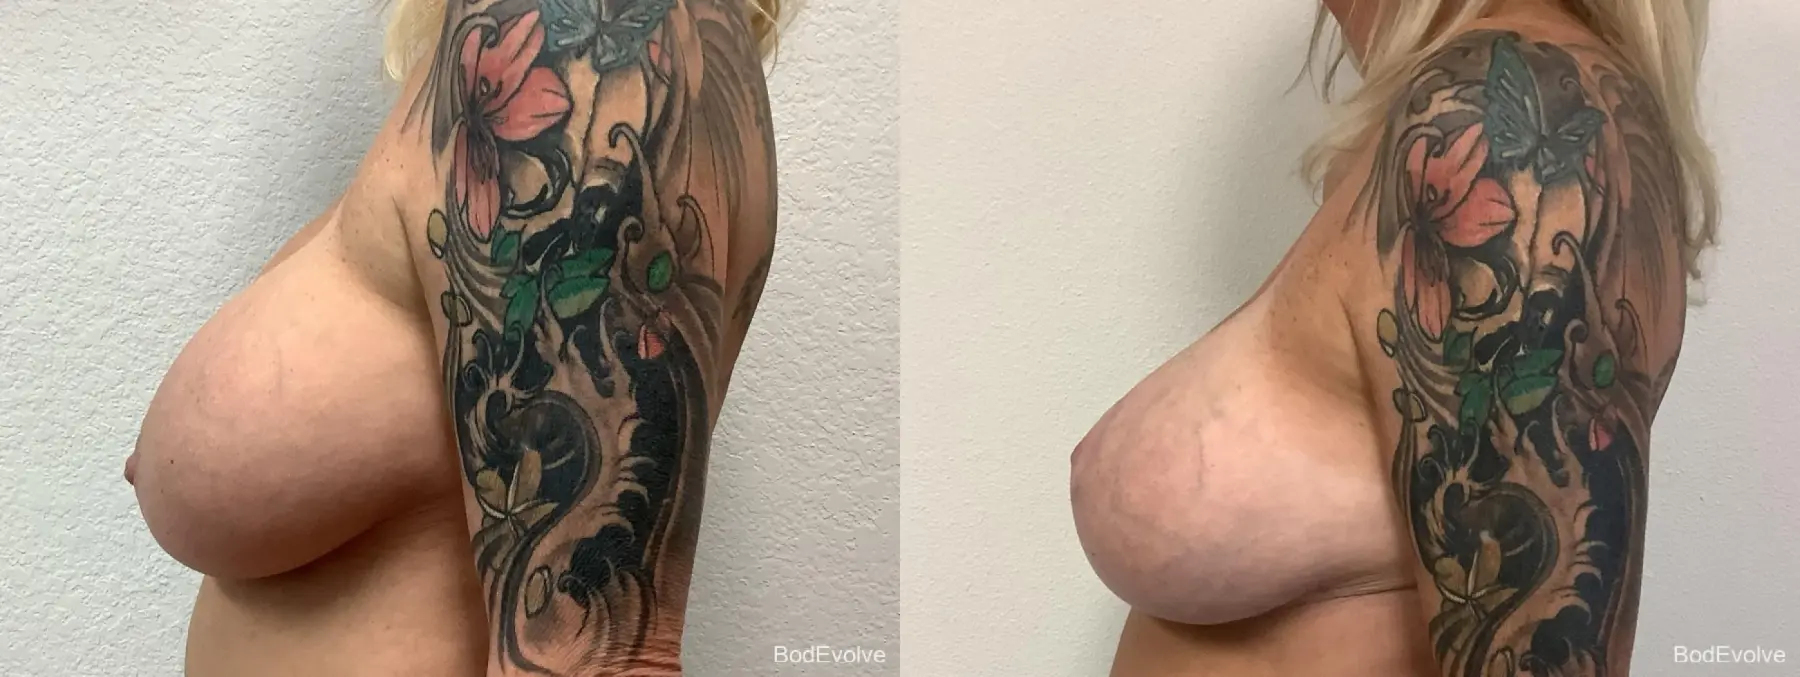 Breast Augmentation With Lift: Patient 3 - Before and After 3